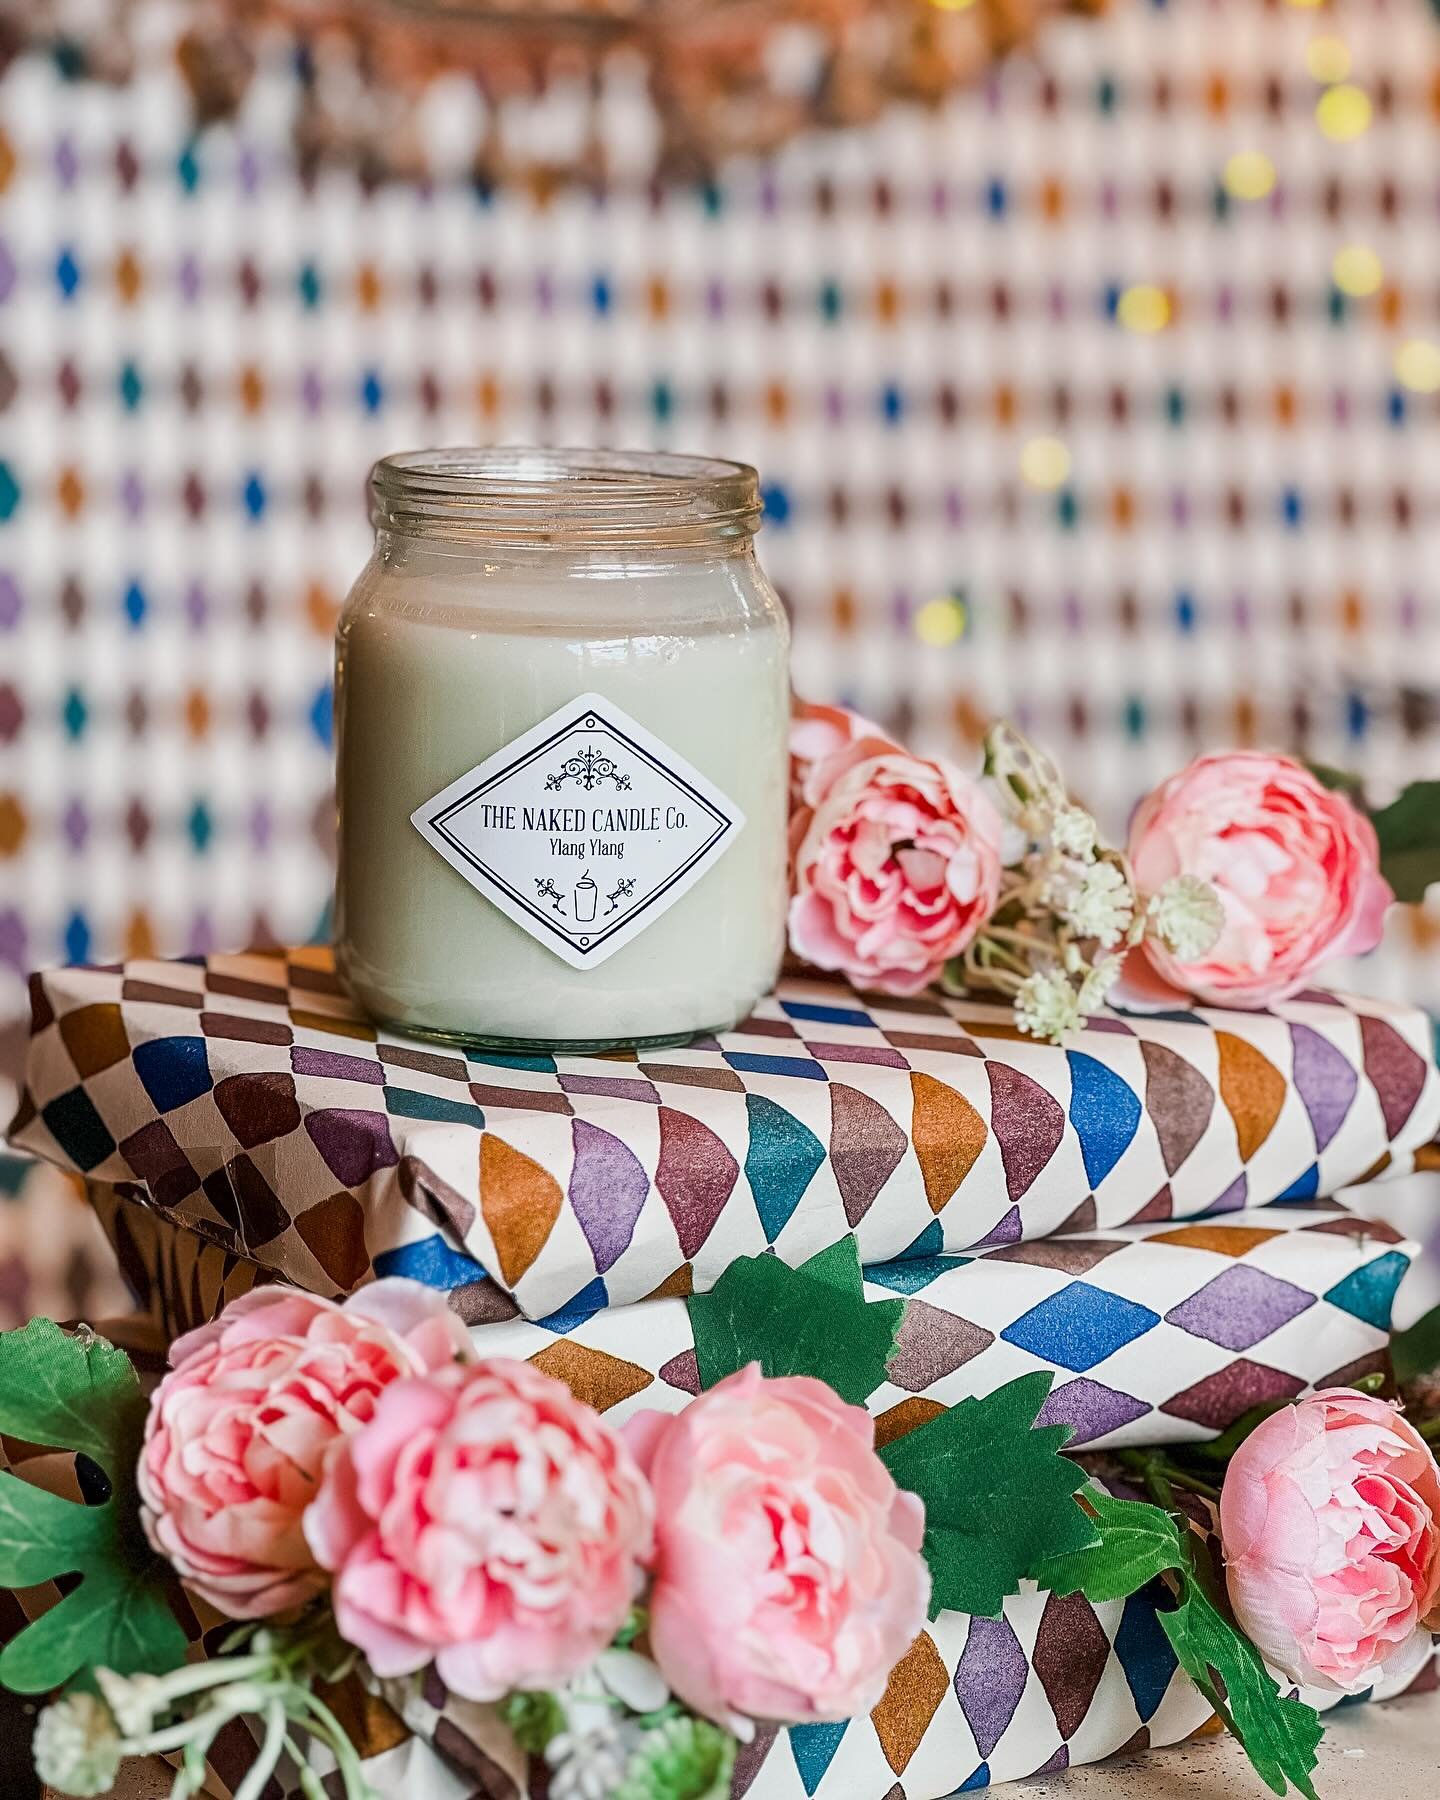 If your scent palette craves floral notes, this candle is the ONE ❤️🌸 @thenakedcandleco I can&rsquo;t get enough of this!! 🙌✨ online now ✨